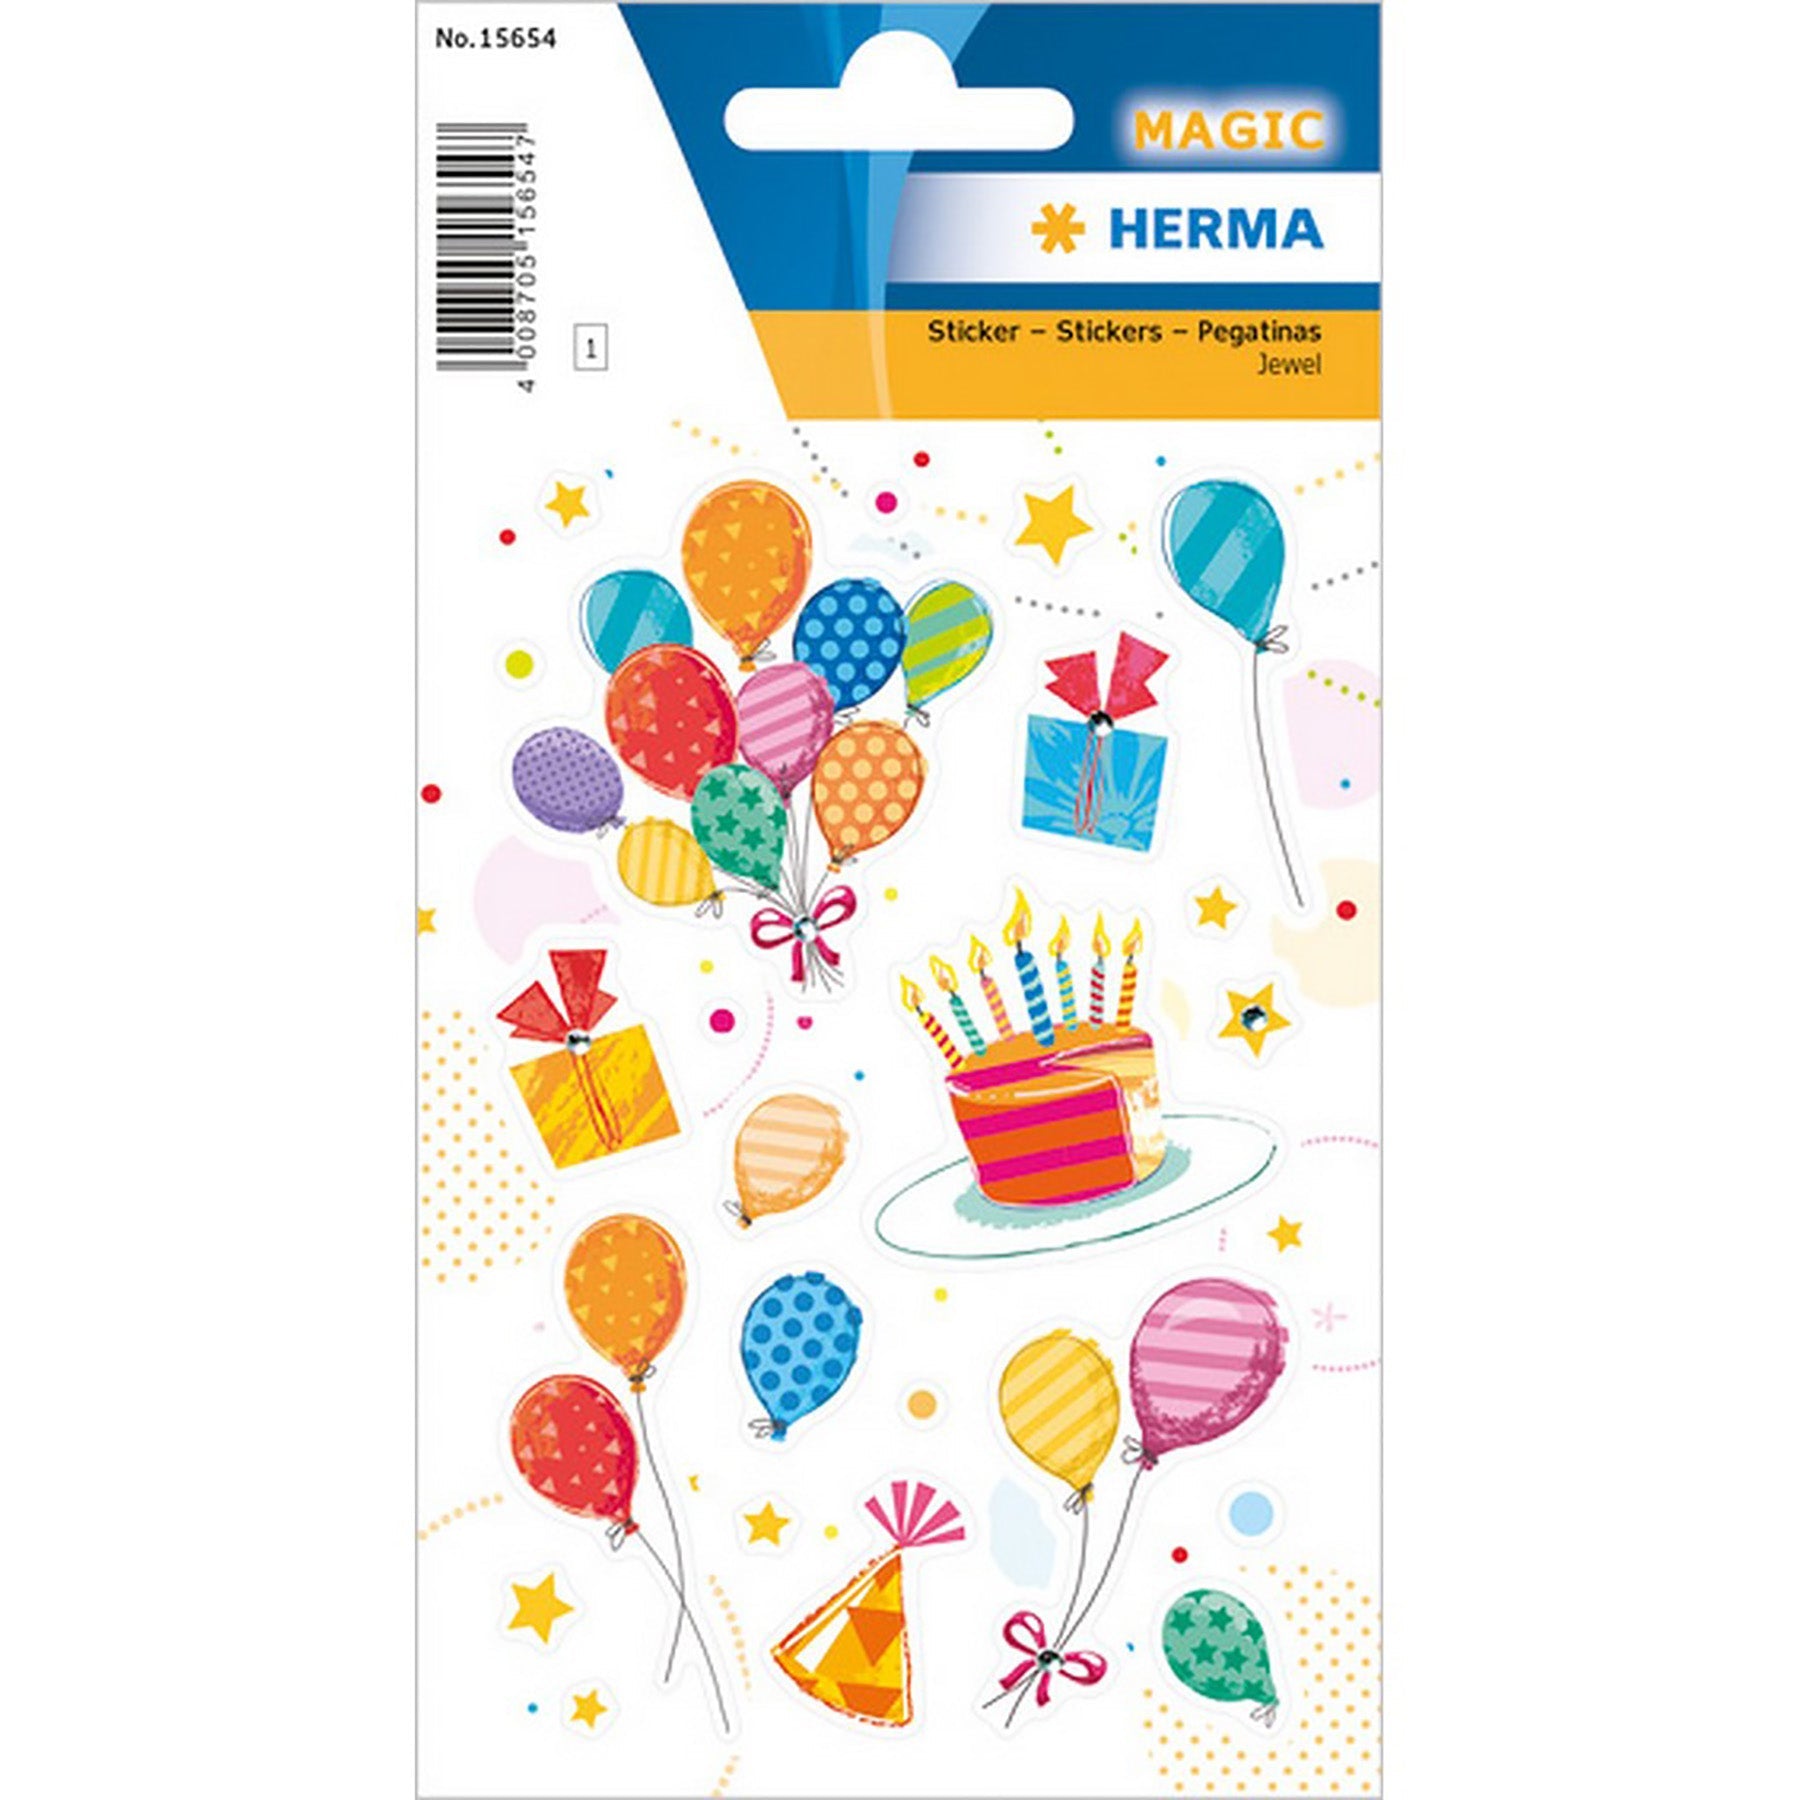 Herma Magic Stickers Birthday Party with Jewel 4.75x3.1in Sheet